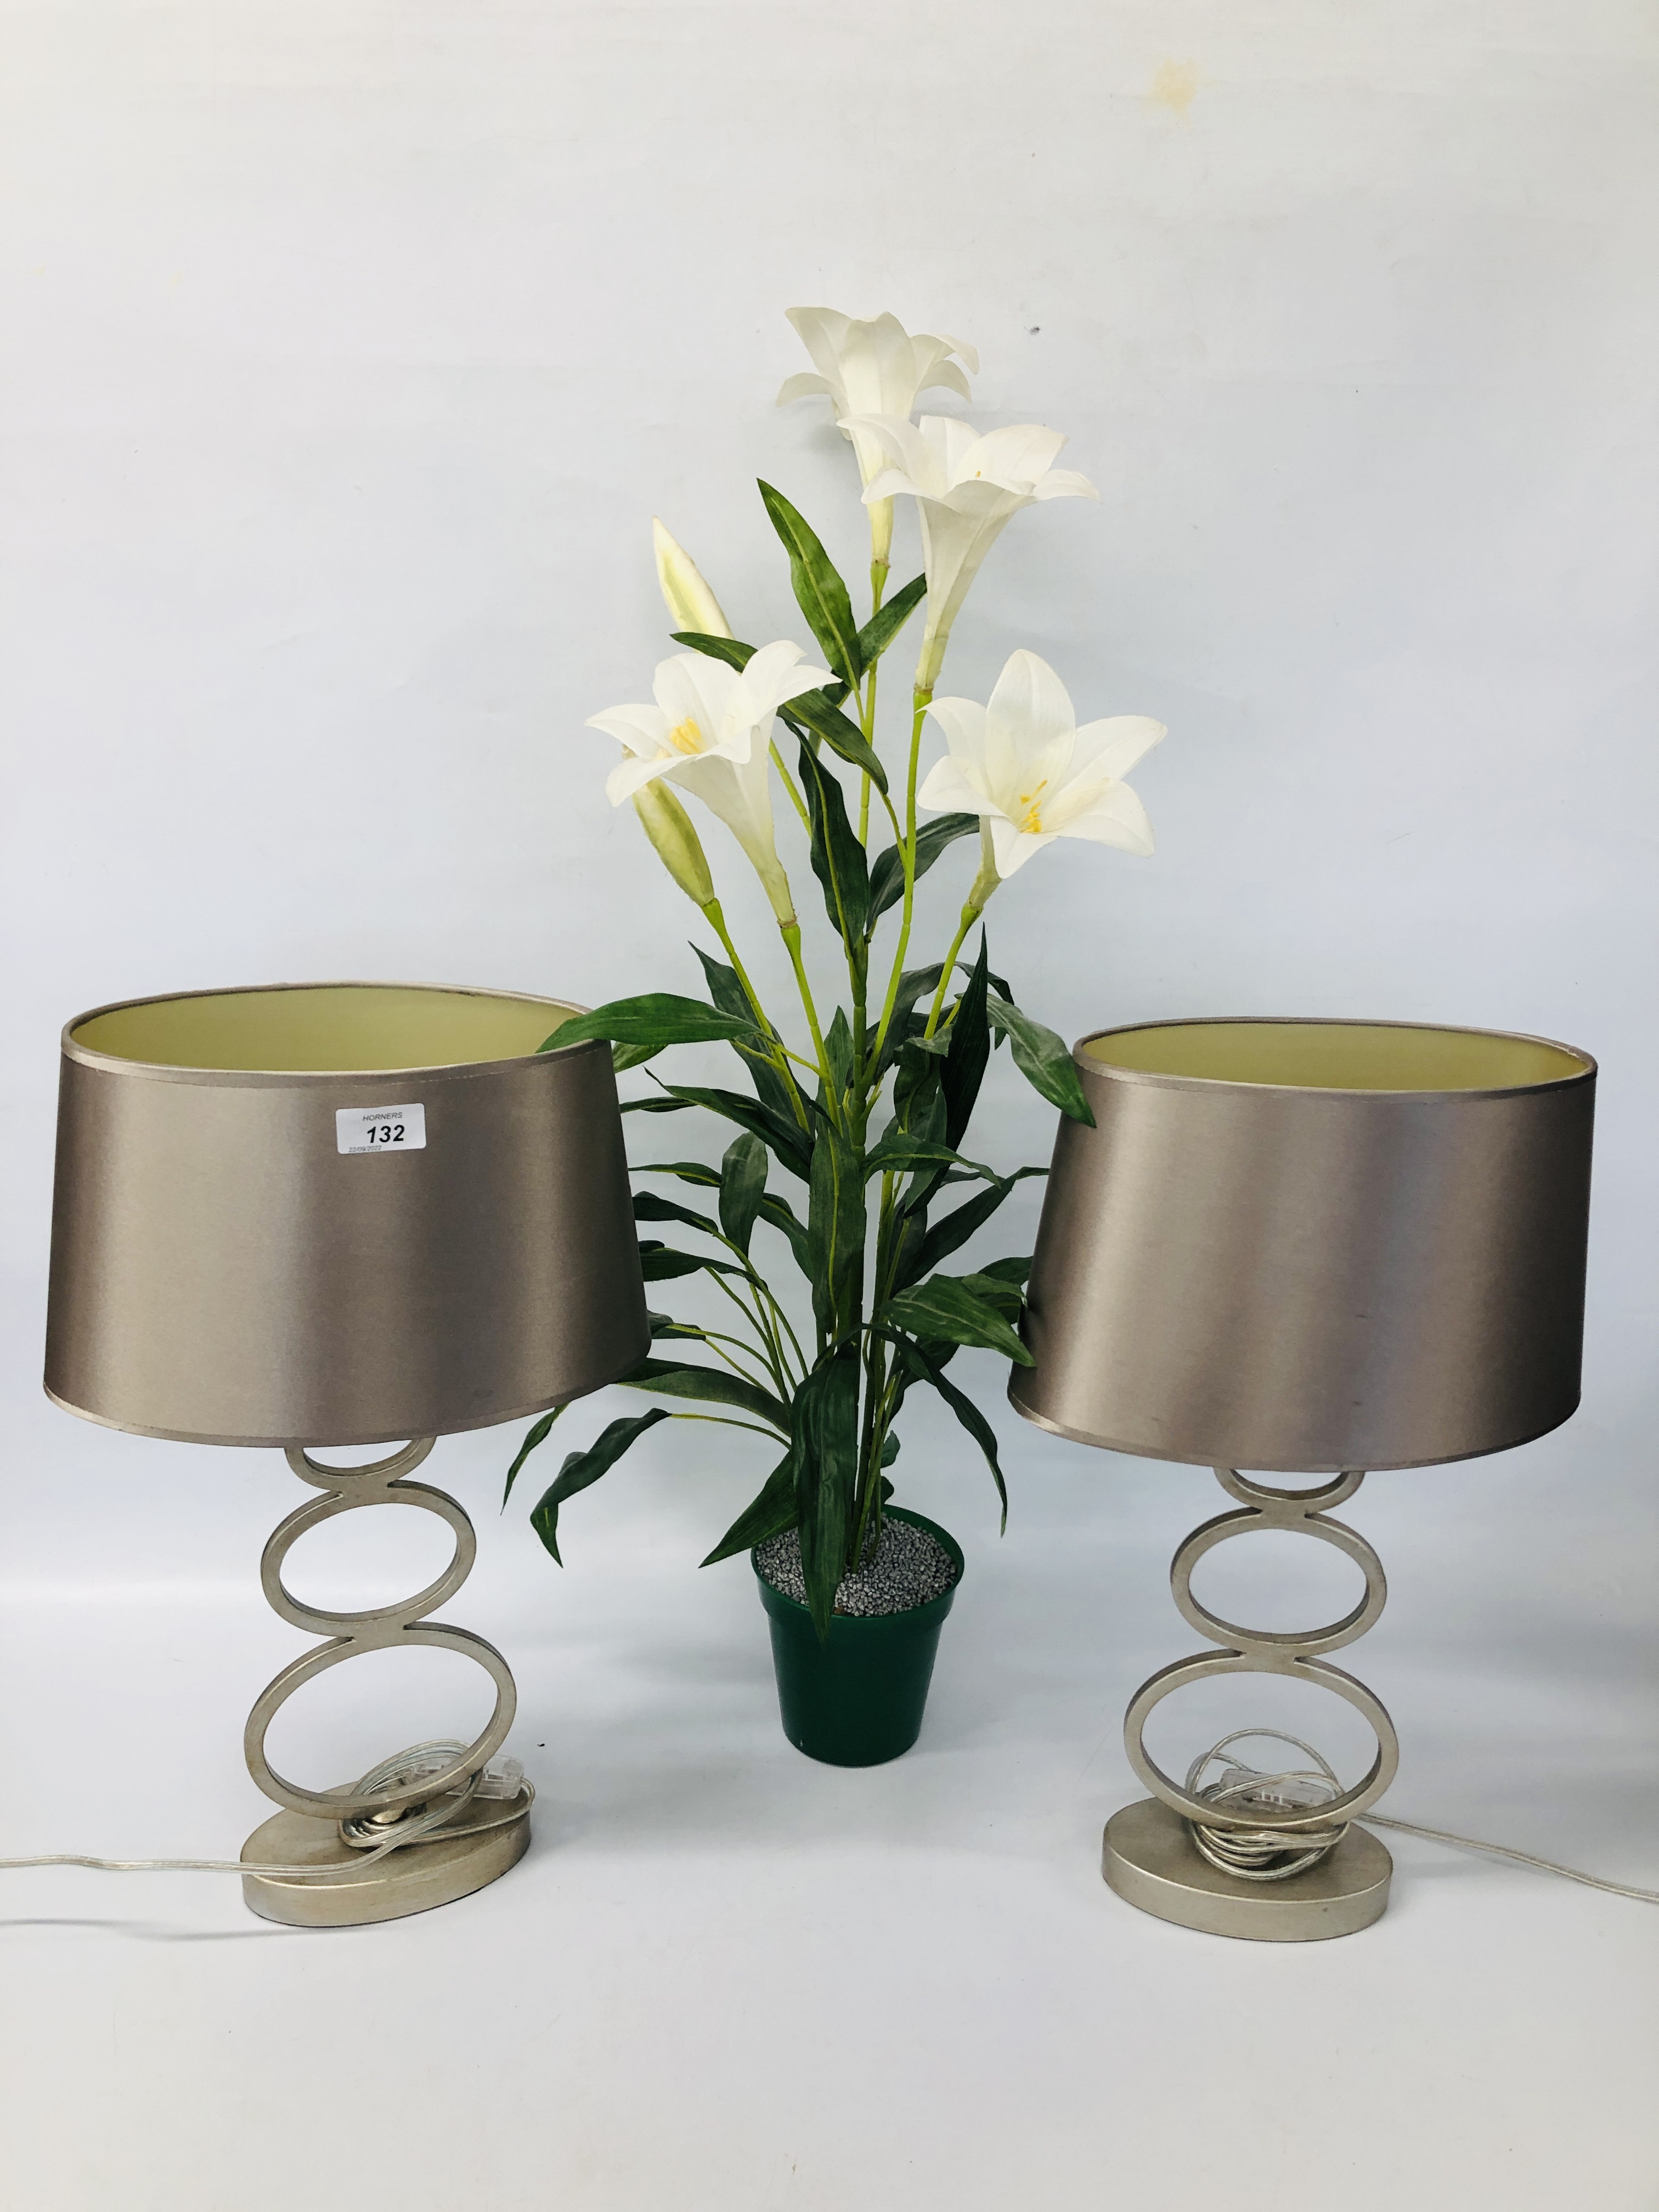 PAIR OF MODERN LAURA ASHLEY TABLE LAMPS AND SHADES ALONG WITH AN ARTIFICIAL LILY ARRANGEMENT - SOLD